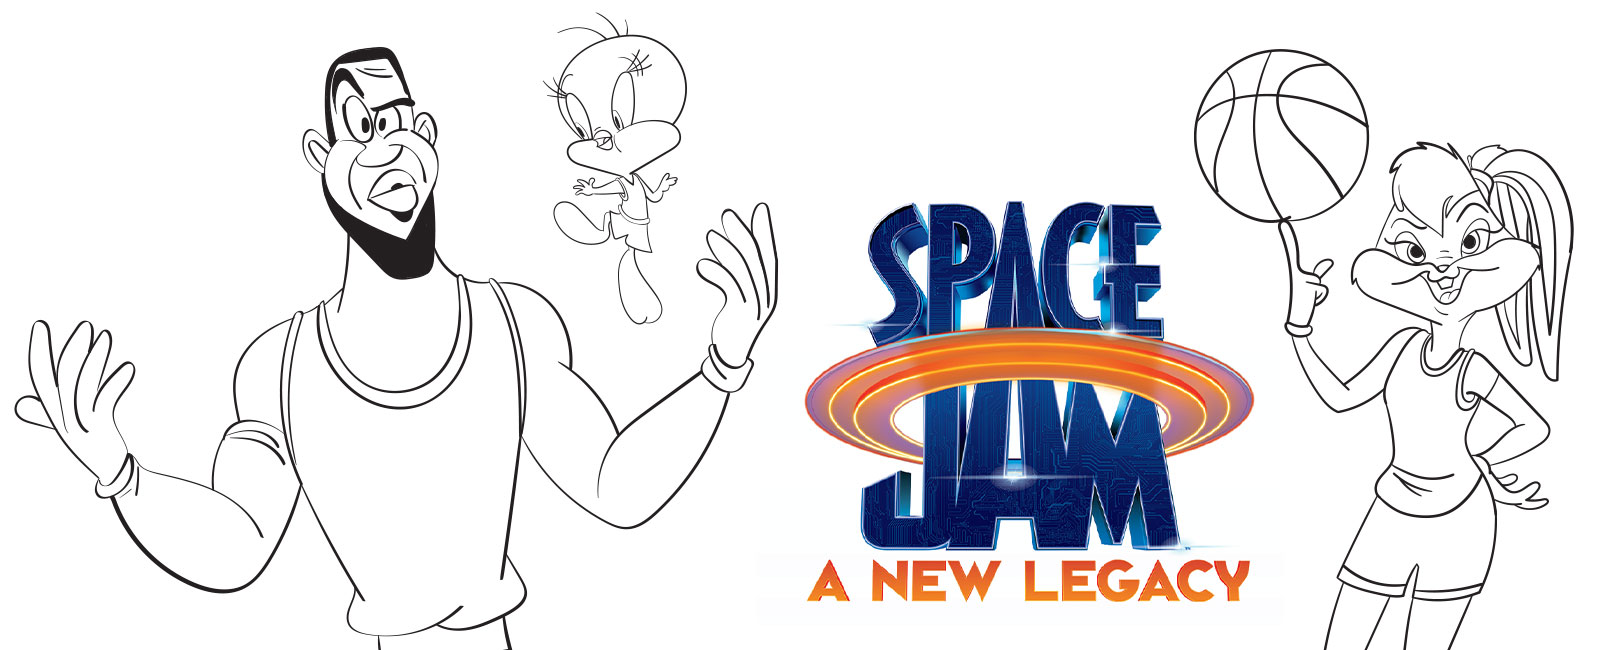 Space Jam 2 - A new legacy